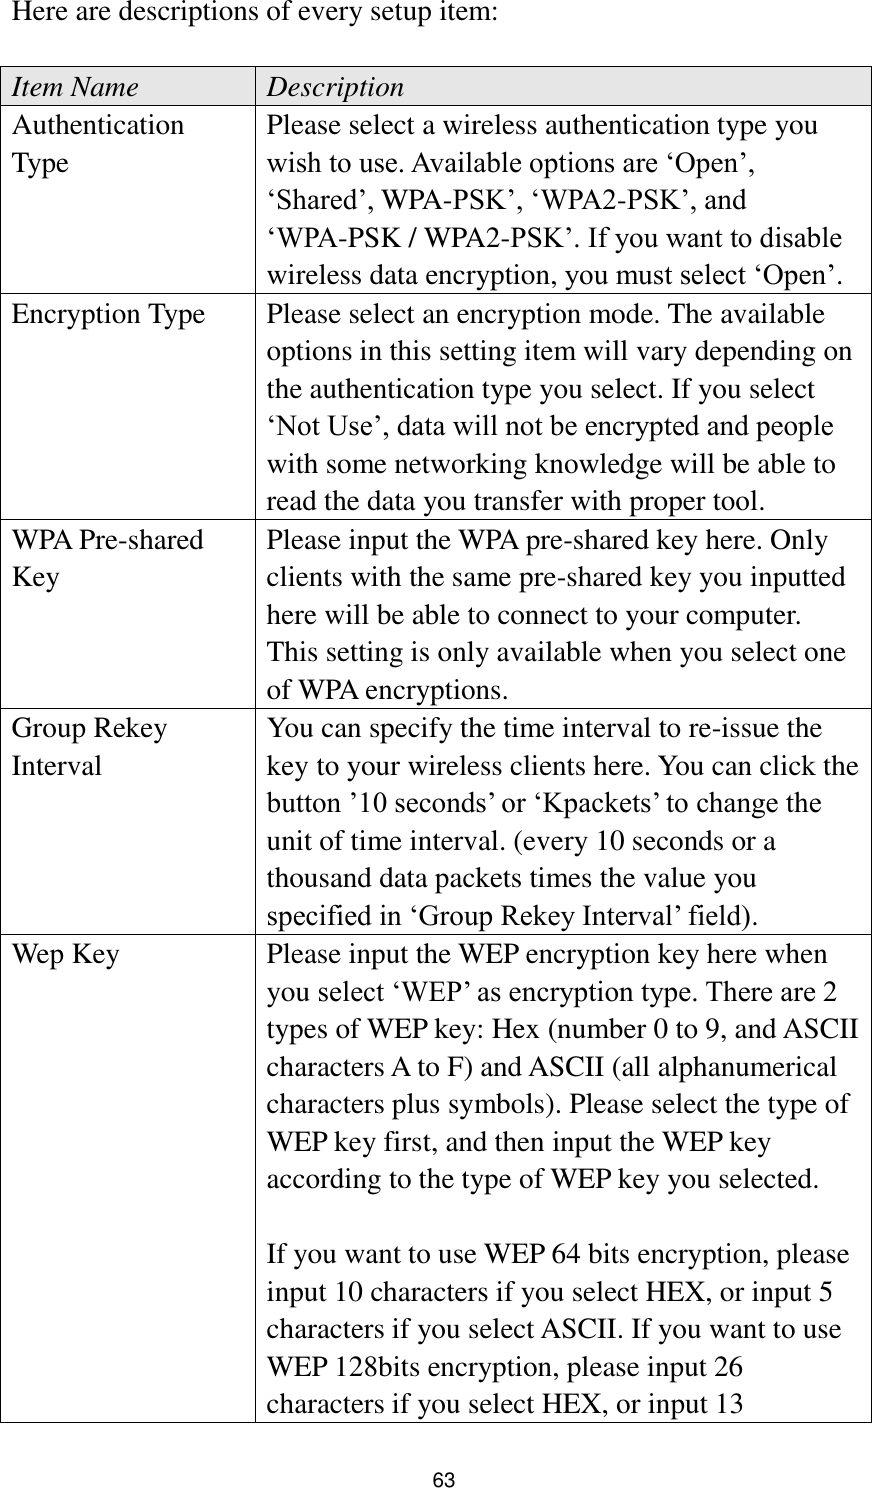  63 Here are descriptions of every setup item:  Item Name Description Authentication Type Please select a wireless authentication type you wish to use. Available options are „Open‟, „Shared‟, WPA-PSK‟, „WPA2-PSK‟, and „WPA-PSK / WPA2-PSK‟. If you want to disable wireless data encryption, you must select „Open‟. Encryption Type Please select an encryption mode. The available options in this setting item will vary depending on the authentication type you select. If you select „Not Use‟, data will not be encrypted and people with some networking knowledge will be able to read the data you transfer with proper tool. WPA Pre-shared Key Please input the WPA pre-shared key here. Only clients with the same pre-shared key you inputted here will be able to connect to your computer. This setting is only available when you select one of WPA encryptions. Group Rekey Interval You can specify the time interval to re-issue the key to your wireless clients here. You can click the button ‟10 seconds‟ or „Kpackets‟ to change the unit of time interval. (every 10 seconds or a thousand data packets times the value you specified in „Group Rekey Interval‟ field). Wep Key Please input the WEP encryption key here when you select „WEP‟ as encryption type. There are 2 types of WEP key: Hex (number 0 to 9, and ASCII characters A to F) and ASCII (all alphanumerical characters plus symbols). Please select the type of WEP key first, and then input the WEP key according to the type of WEP key you selected.  If you want to use WEP 64 bits encryption, please input 10 characters if you select HEX, or input 5 characters if you select ASCII. If you want to use WEP 128bits encryption, please input 26 characters if you select HEX, or input 13 